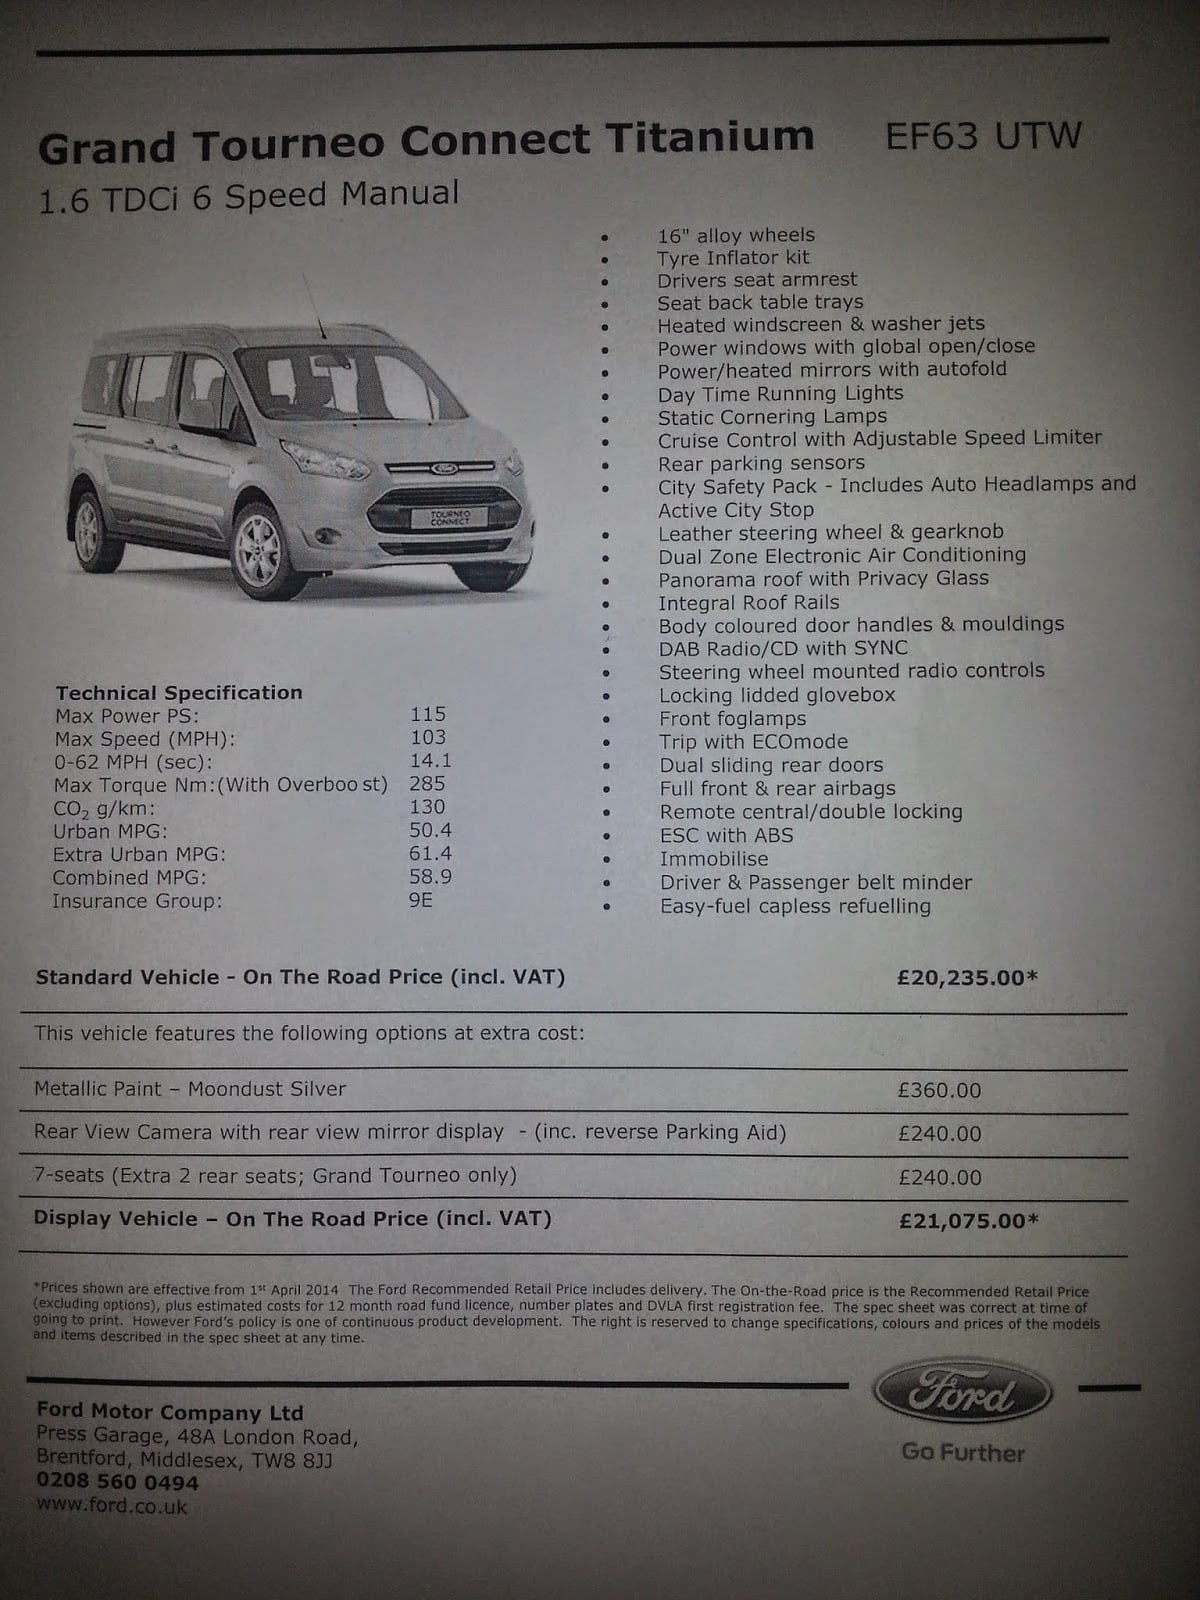 Ford Tourneo Connect dimensions, boot space and similars